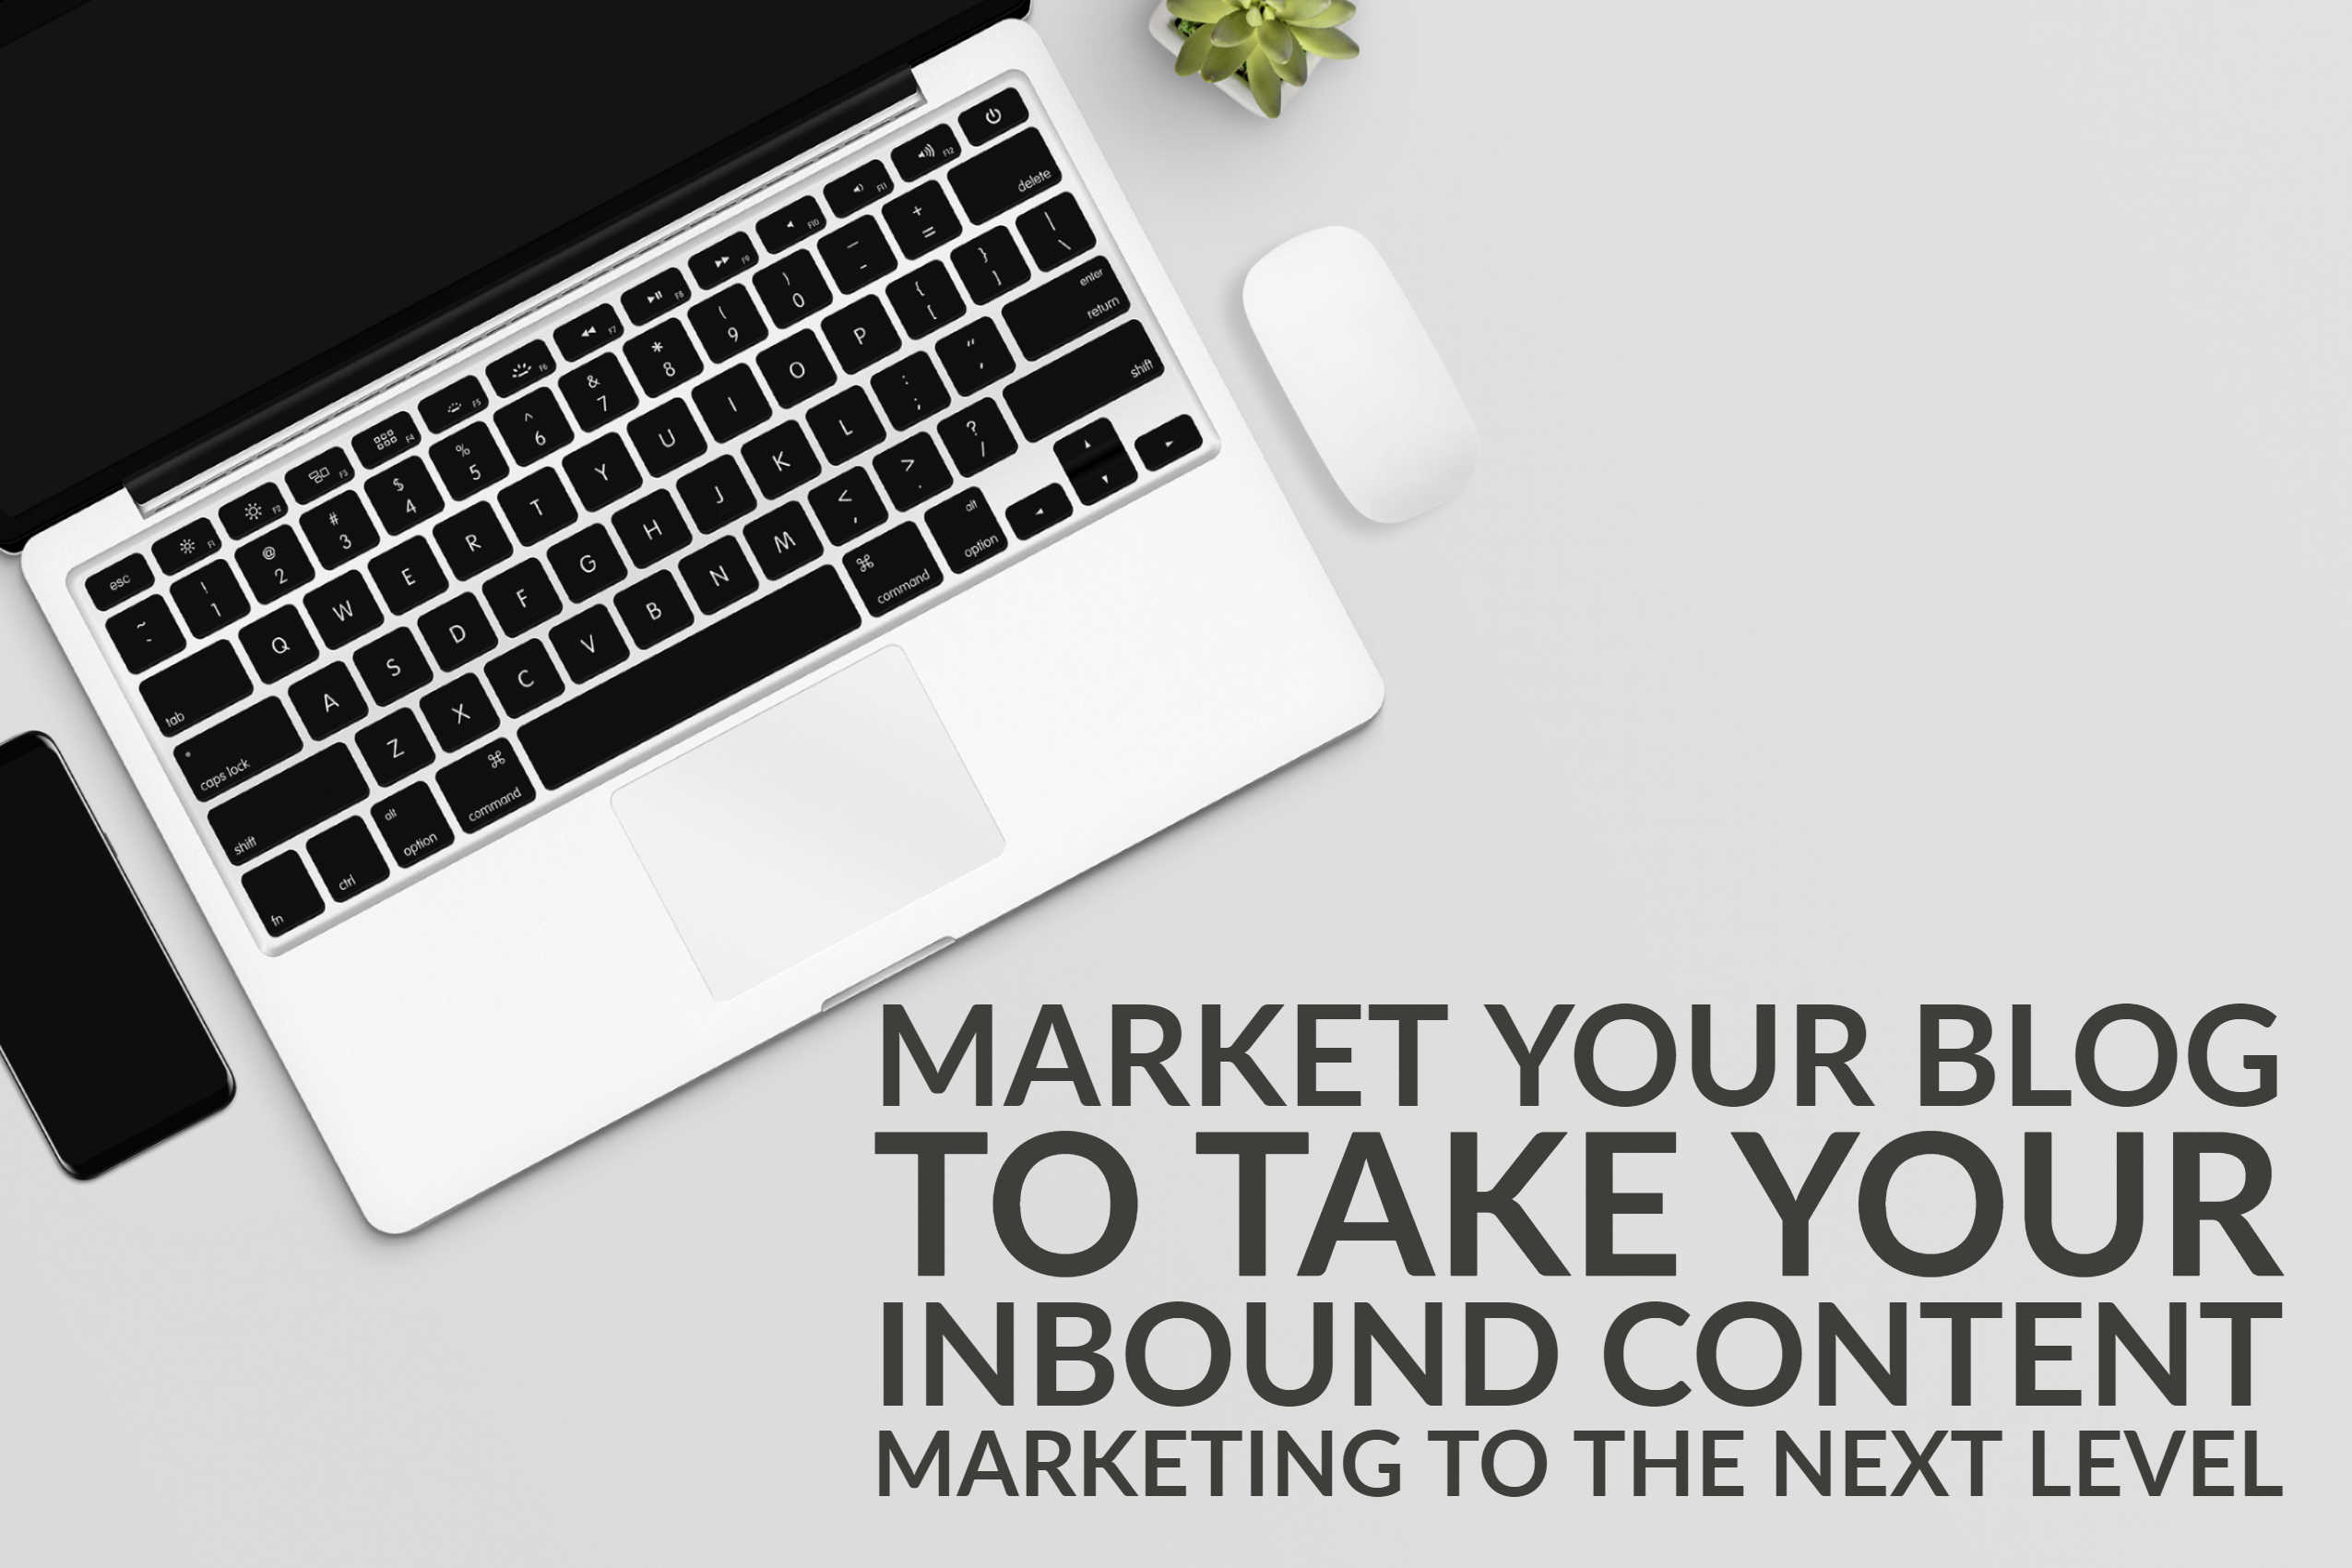 Market Your Blog To Take Your Inbound Content Marketing To The Next Level